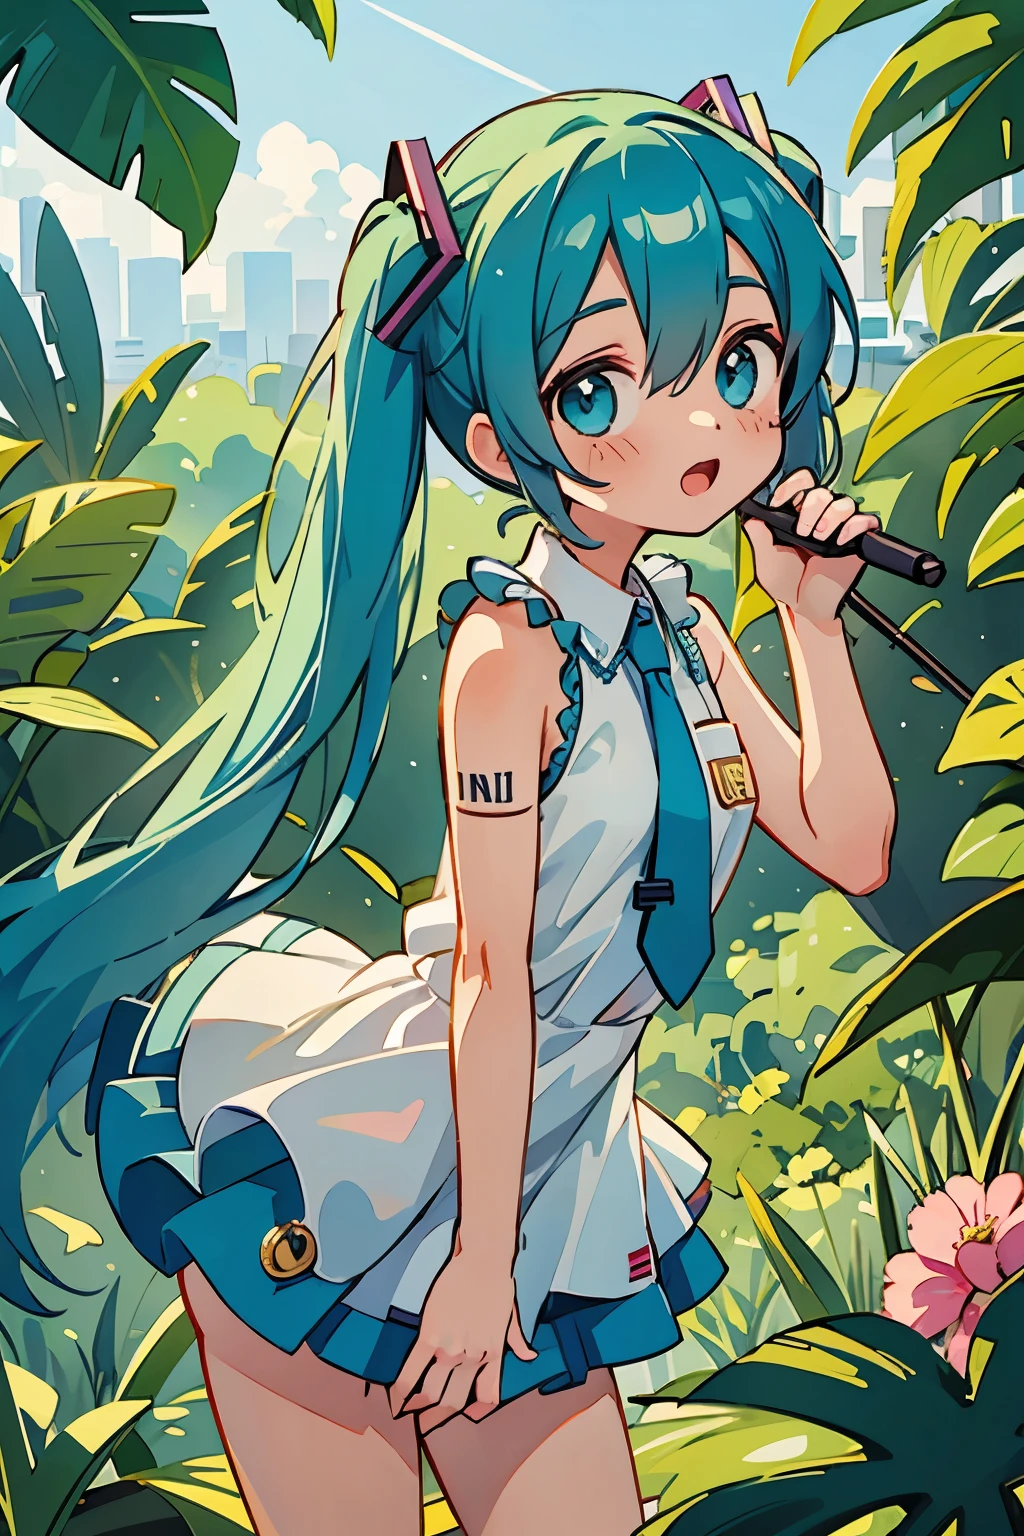 Ooh-ee-ooh
Ooh-ee-ooh
Ooh-ee-ooh
Ooh-ee-ooh
Miku, Miku, you can call me Miku
Blue hair, blue tie, hiding in your Wi-Fi
Open secrets, anyone can find me
Hear your music running through my mind
I'm thinking Miku, Miku (ooh-ee-ooh)
I'm thinking Miku, Miku (ooh-ee-ooh)
I'm thinking Miku, Miku (ooh-ee-ooh)
I'm thinking Miku, Miku (ooh-ee-ooh)
I'm on top of the world because of you
All I wanted to do is follow you
I'll keep singing along to all of you
I'll keep singing along
I'm thinking Miku, Miku (ooh-ee-ooh)
I'm thinking Miku, Miku (ooh-ee-ooh)
I'm thinking Miku, Miku (ooh-ee-ooh)
I'm thinking Miku, Miku (ooh-ee-ooh)
Miku, Miku, what's it like to be you?
20, 20, looking in the rear-view
Play me, break me, make me feel like Superman
You can do anything you want
I'm on top of the world because of you
All I wanted to do is follow you
I'll keep singing along to all of you
I'll keep singing along
I'm on top of the world because of you
I do nothing that they could never do
I'll keep playing along with all of you
I'll keep playing along
I'm thinking Miku, Miku (ooh-ee-ooh)
I'm thinking Miku, Miku (ooh-ee-ooh)
I'm thinking Miku, Miku (ooh-ee-ooh)
I'm thinking Miku, Miku (ooh-ee-ooh)
Where we were walking together? I will see you in the end
I'll take you where you've never been, then bring you back again
Listen to me with your eyes, I'm watching you from in the sky
If you forget I'll fade away, I'm asking you to let me stay
So bathe me in your magic light, and keep it on in darkest night
I need you here to keep me strong, to live my life and sing along
I'm lying with you wide awake, like your expensive poison snake
You found me here inside a dream, walk through the fire straight to me